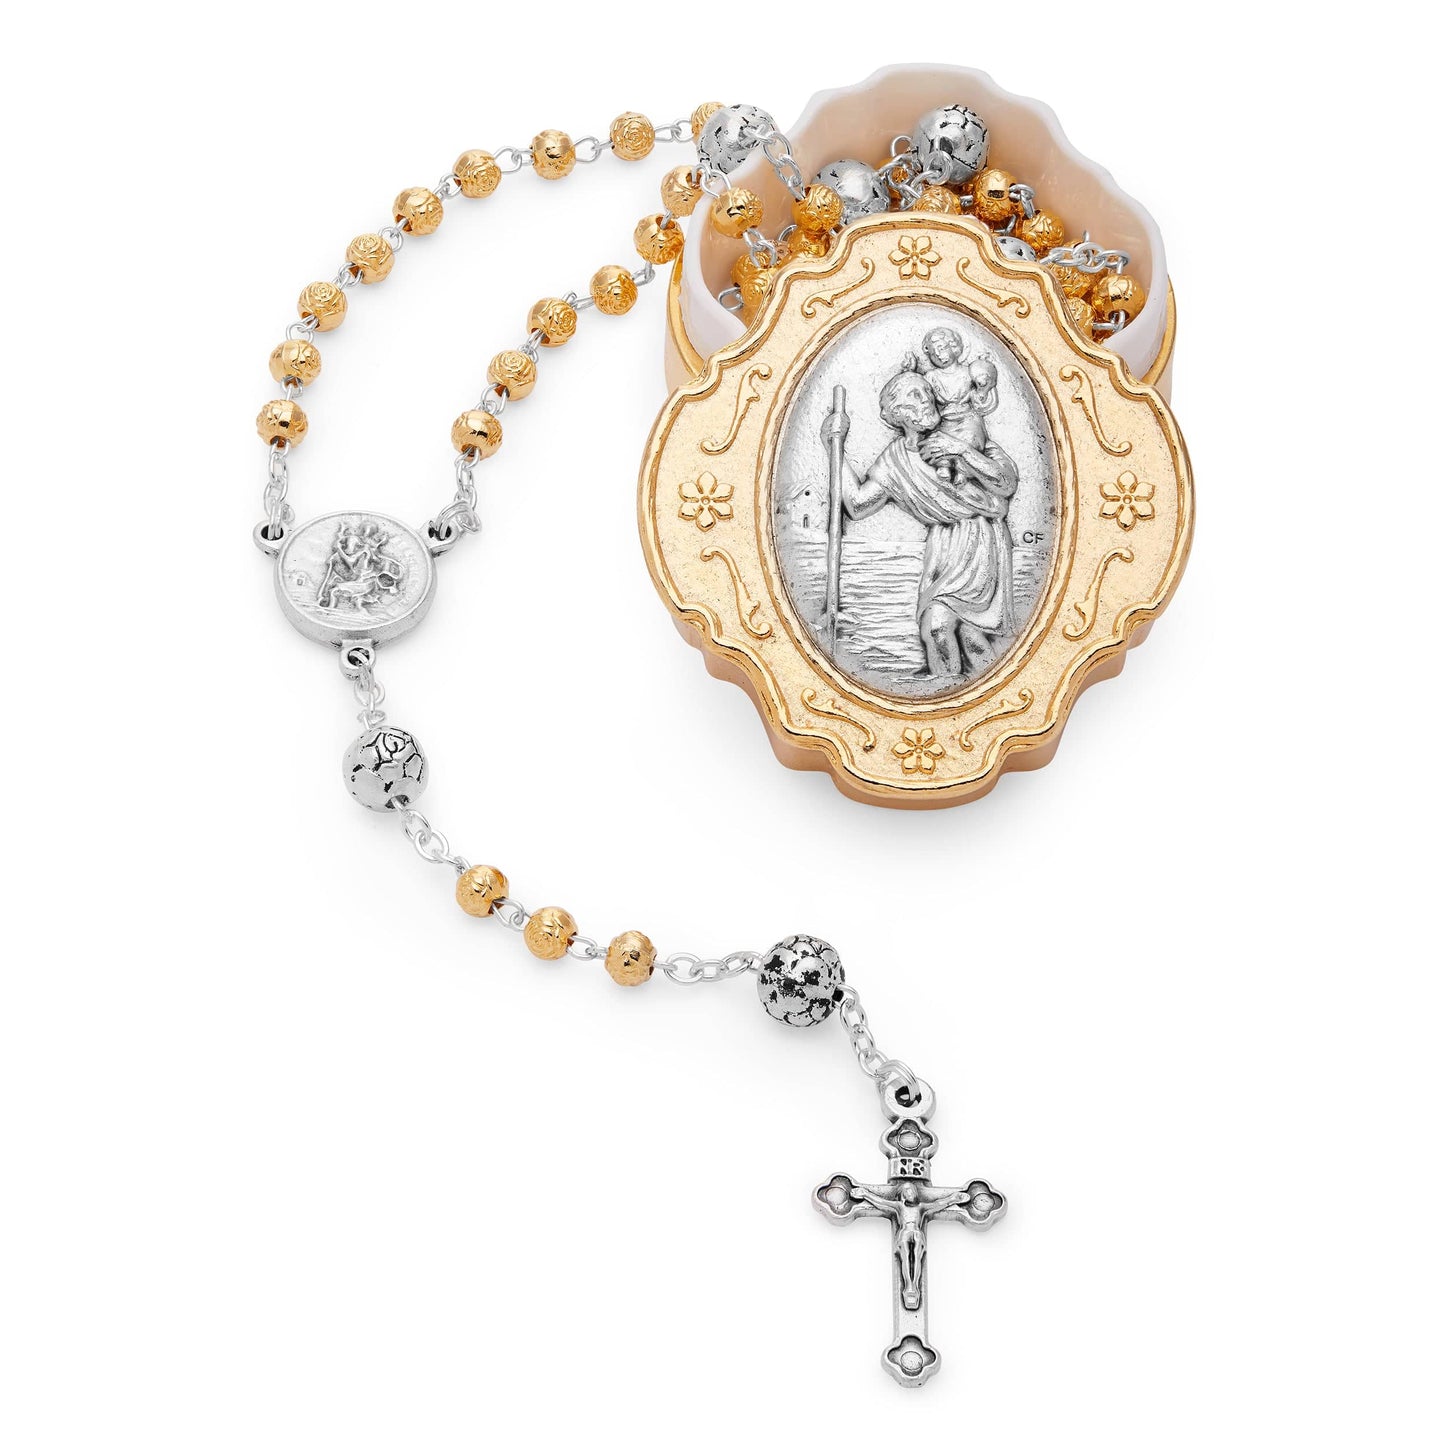 MONDO CATTOLICO Prayer Beads 32 cm (12.6 in) / 4 mm (0.15 in) Saint Christopher Case and Rosary